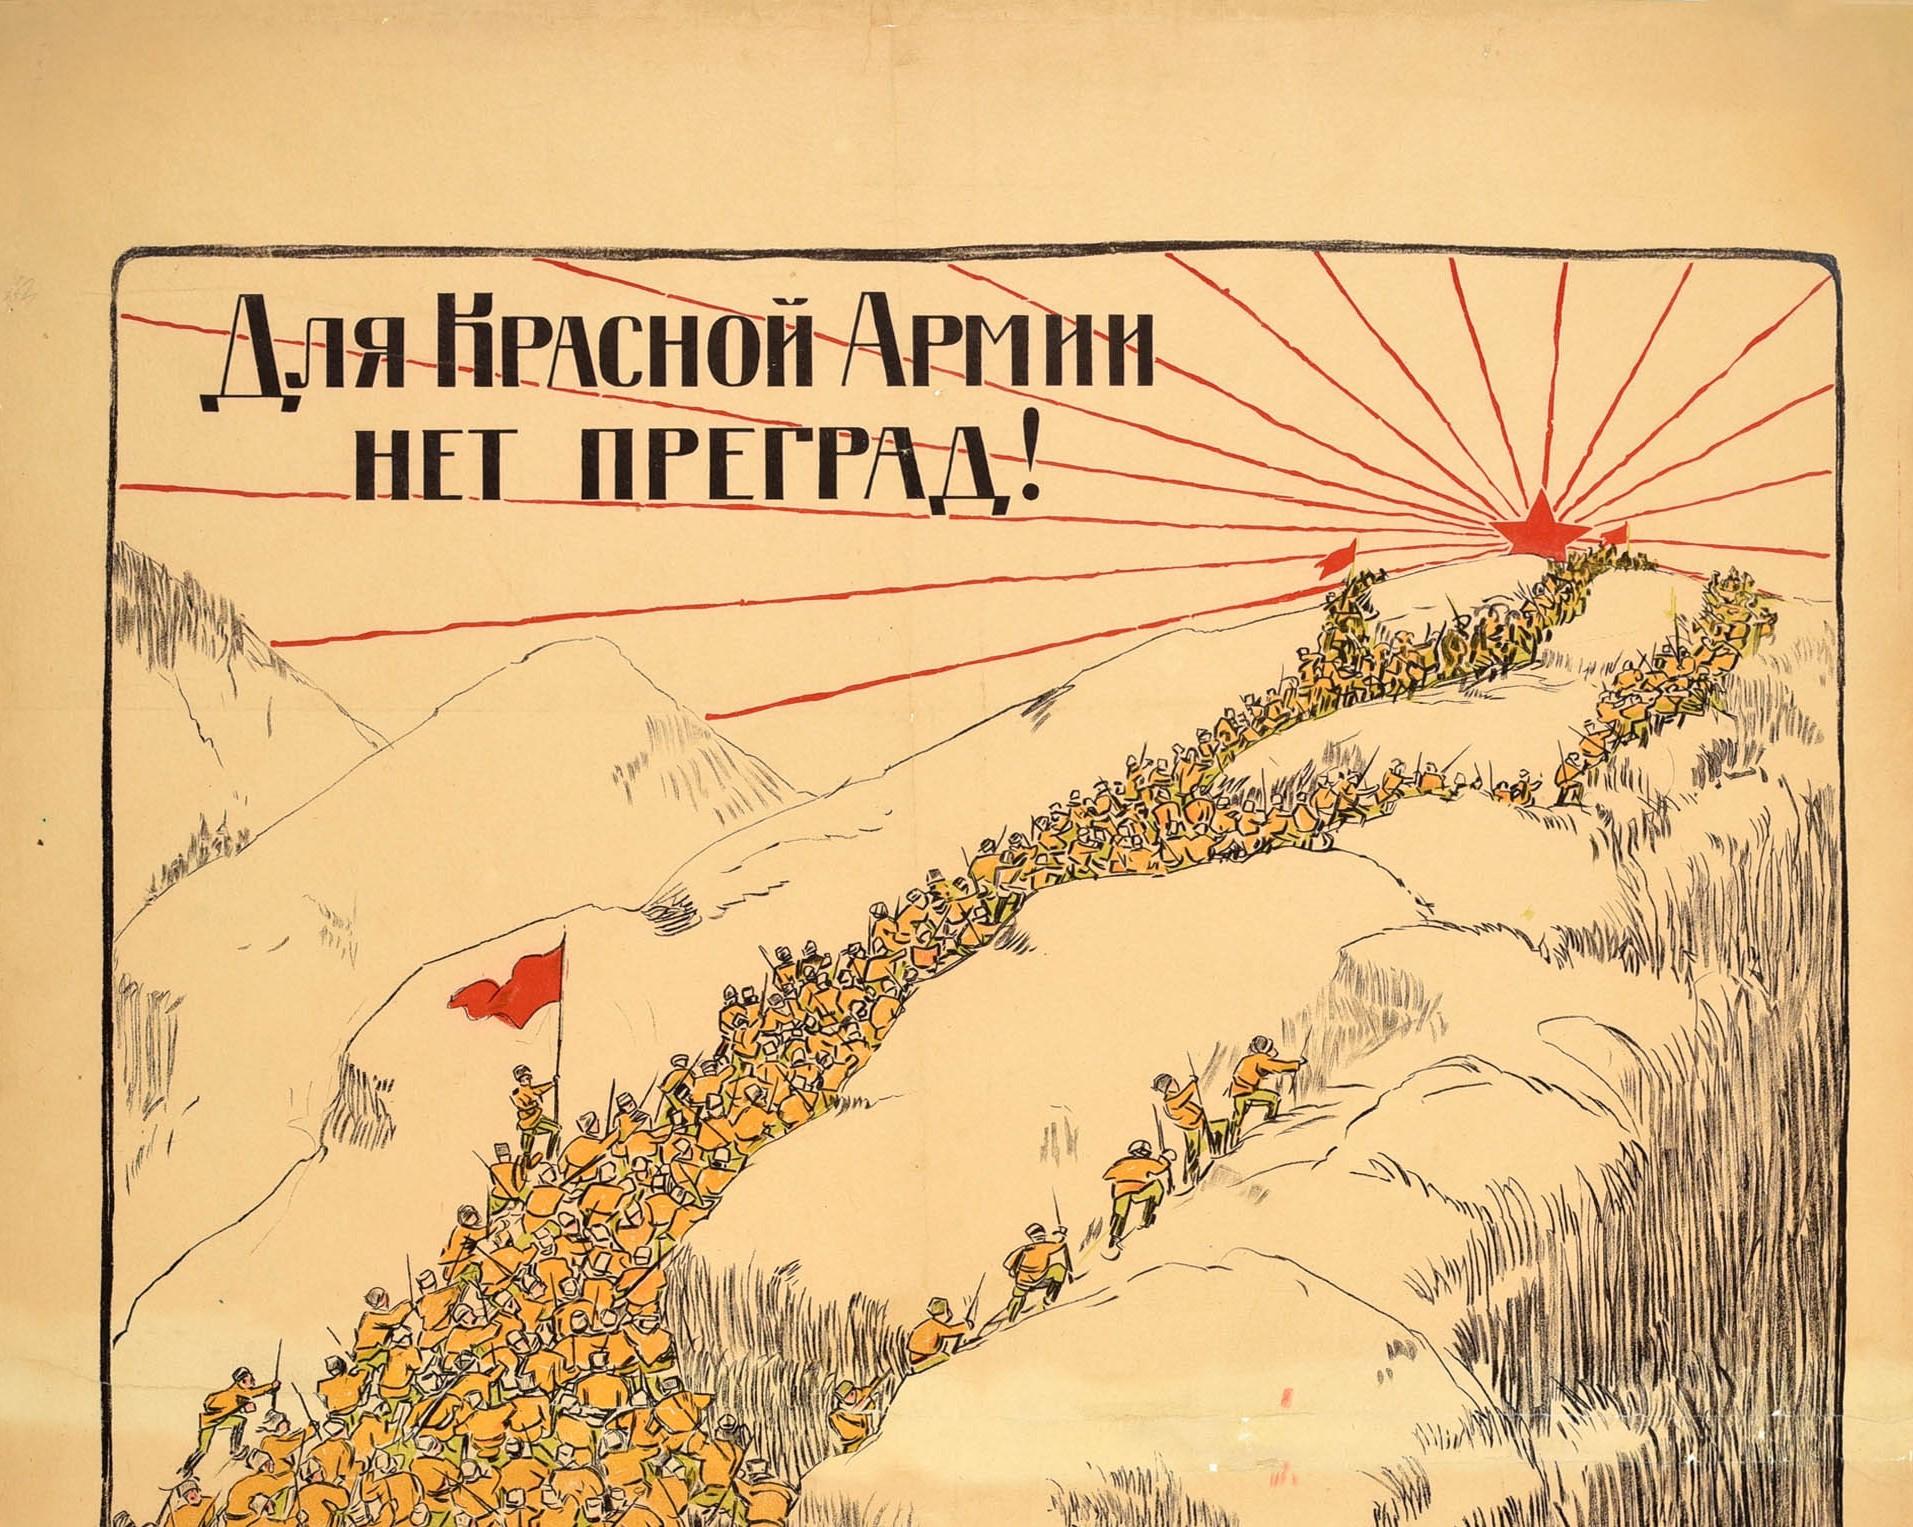 Original antique Soviet propaganda poster - For The Red Army There Are No Barriers! - featuring a great illustration of Soviet soldiers in uniform with rifle guns climbing over a rough hilly terrain with soldiers holding up red flags as the troops